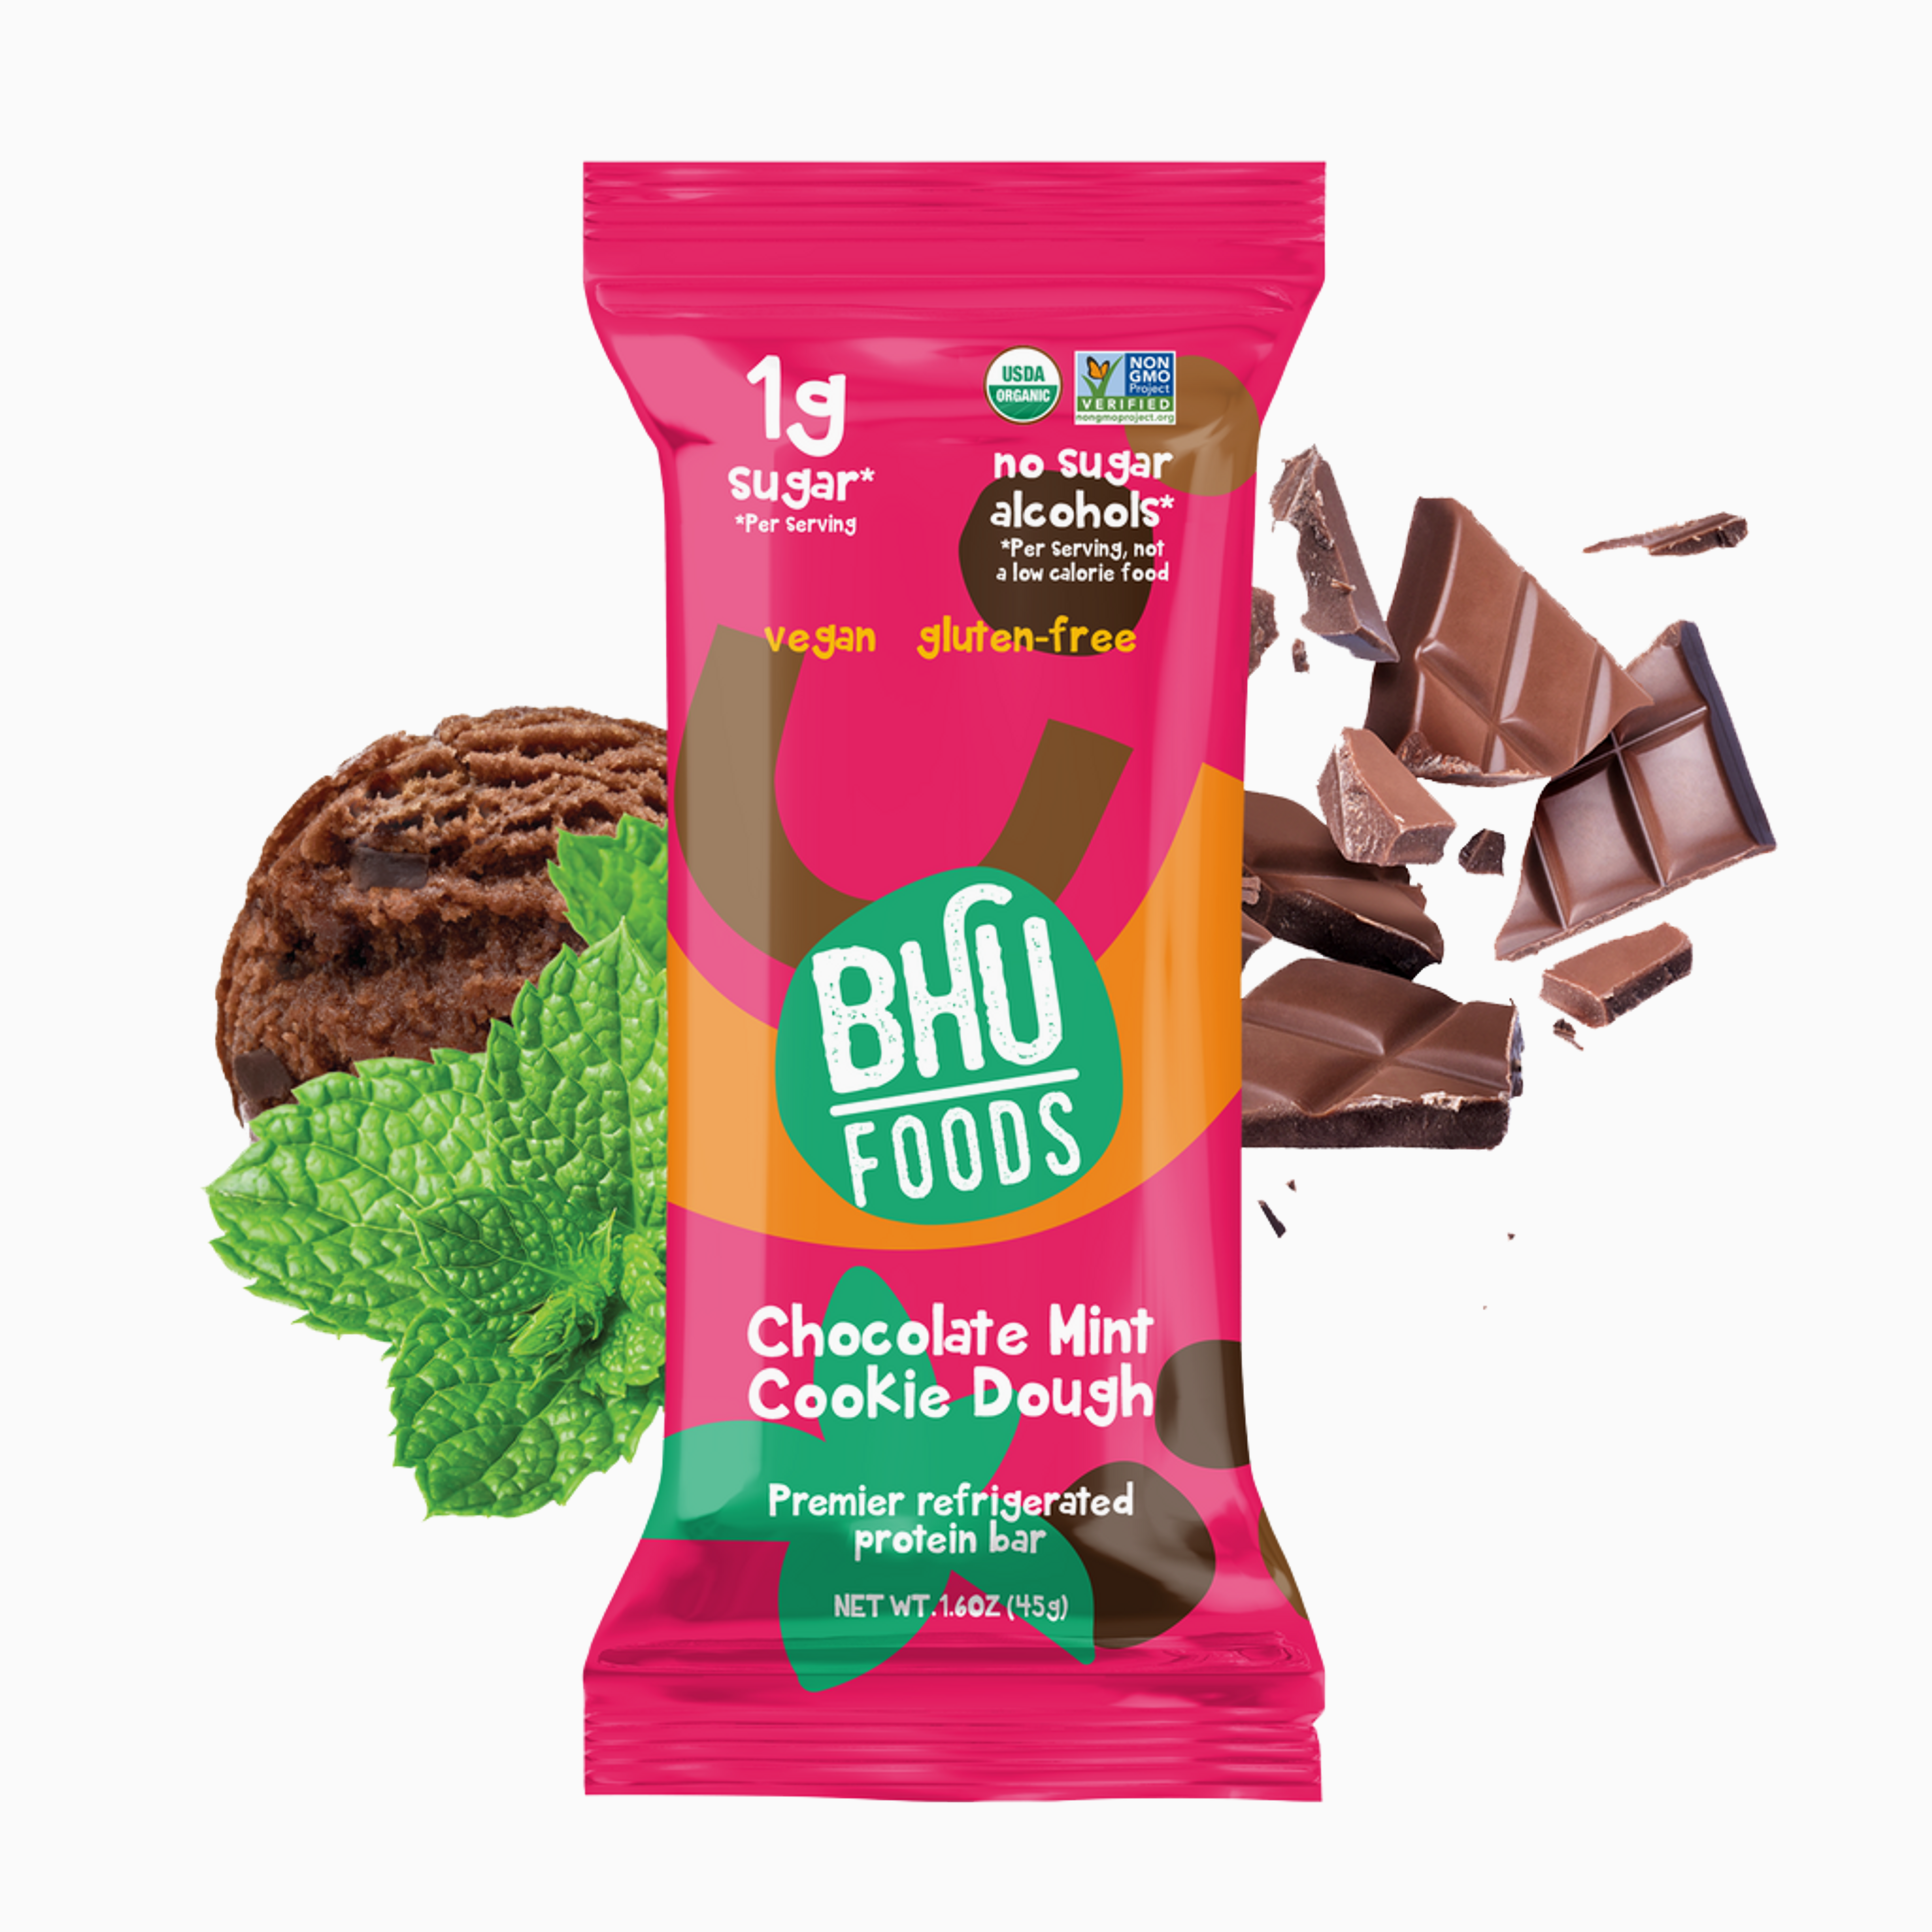 Premier Refrigerated Protein Bar - Mint Double Dark Chocolate Cookie Dough (8 bars - 1.6oz each)